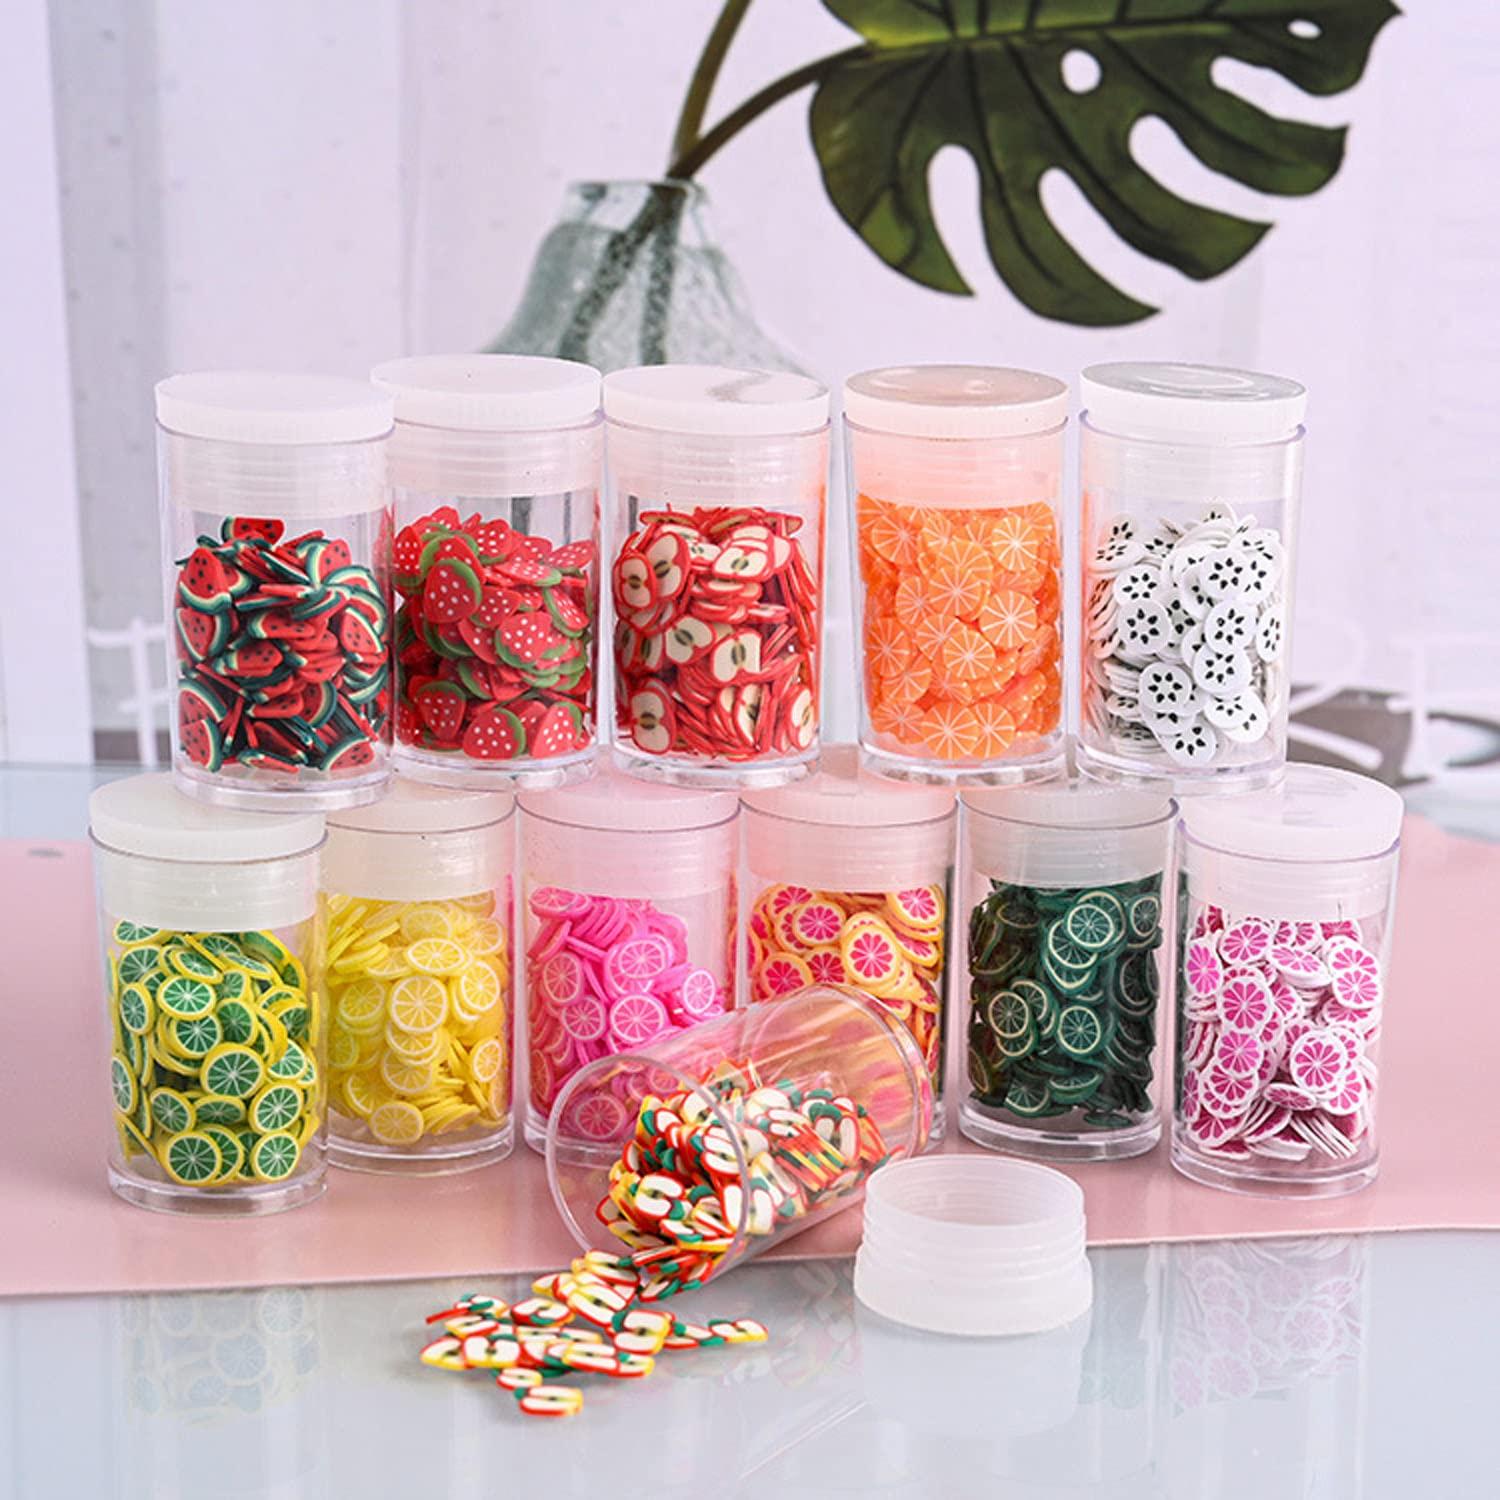  16000 Pcs Fruit Nail Art Slices, Acejoz 20 Styles Fruit Slime  Charms Fimo Slices 3D Polymer Slices for Slime, Lip Gloss Making Supplies  Resin and Nail Art Decorations : Beauty 